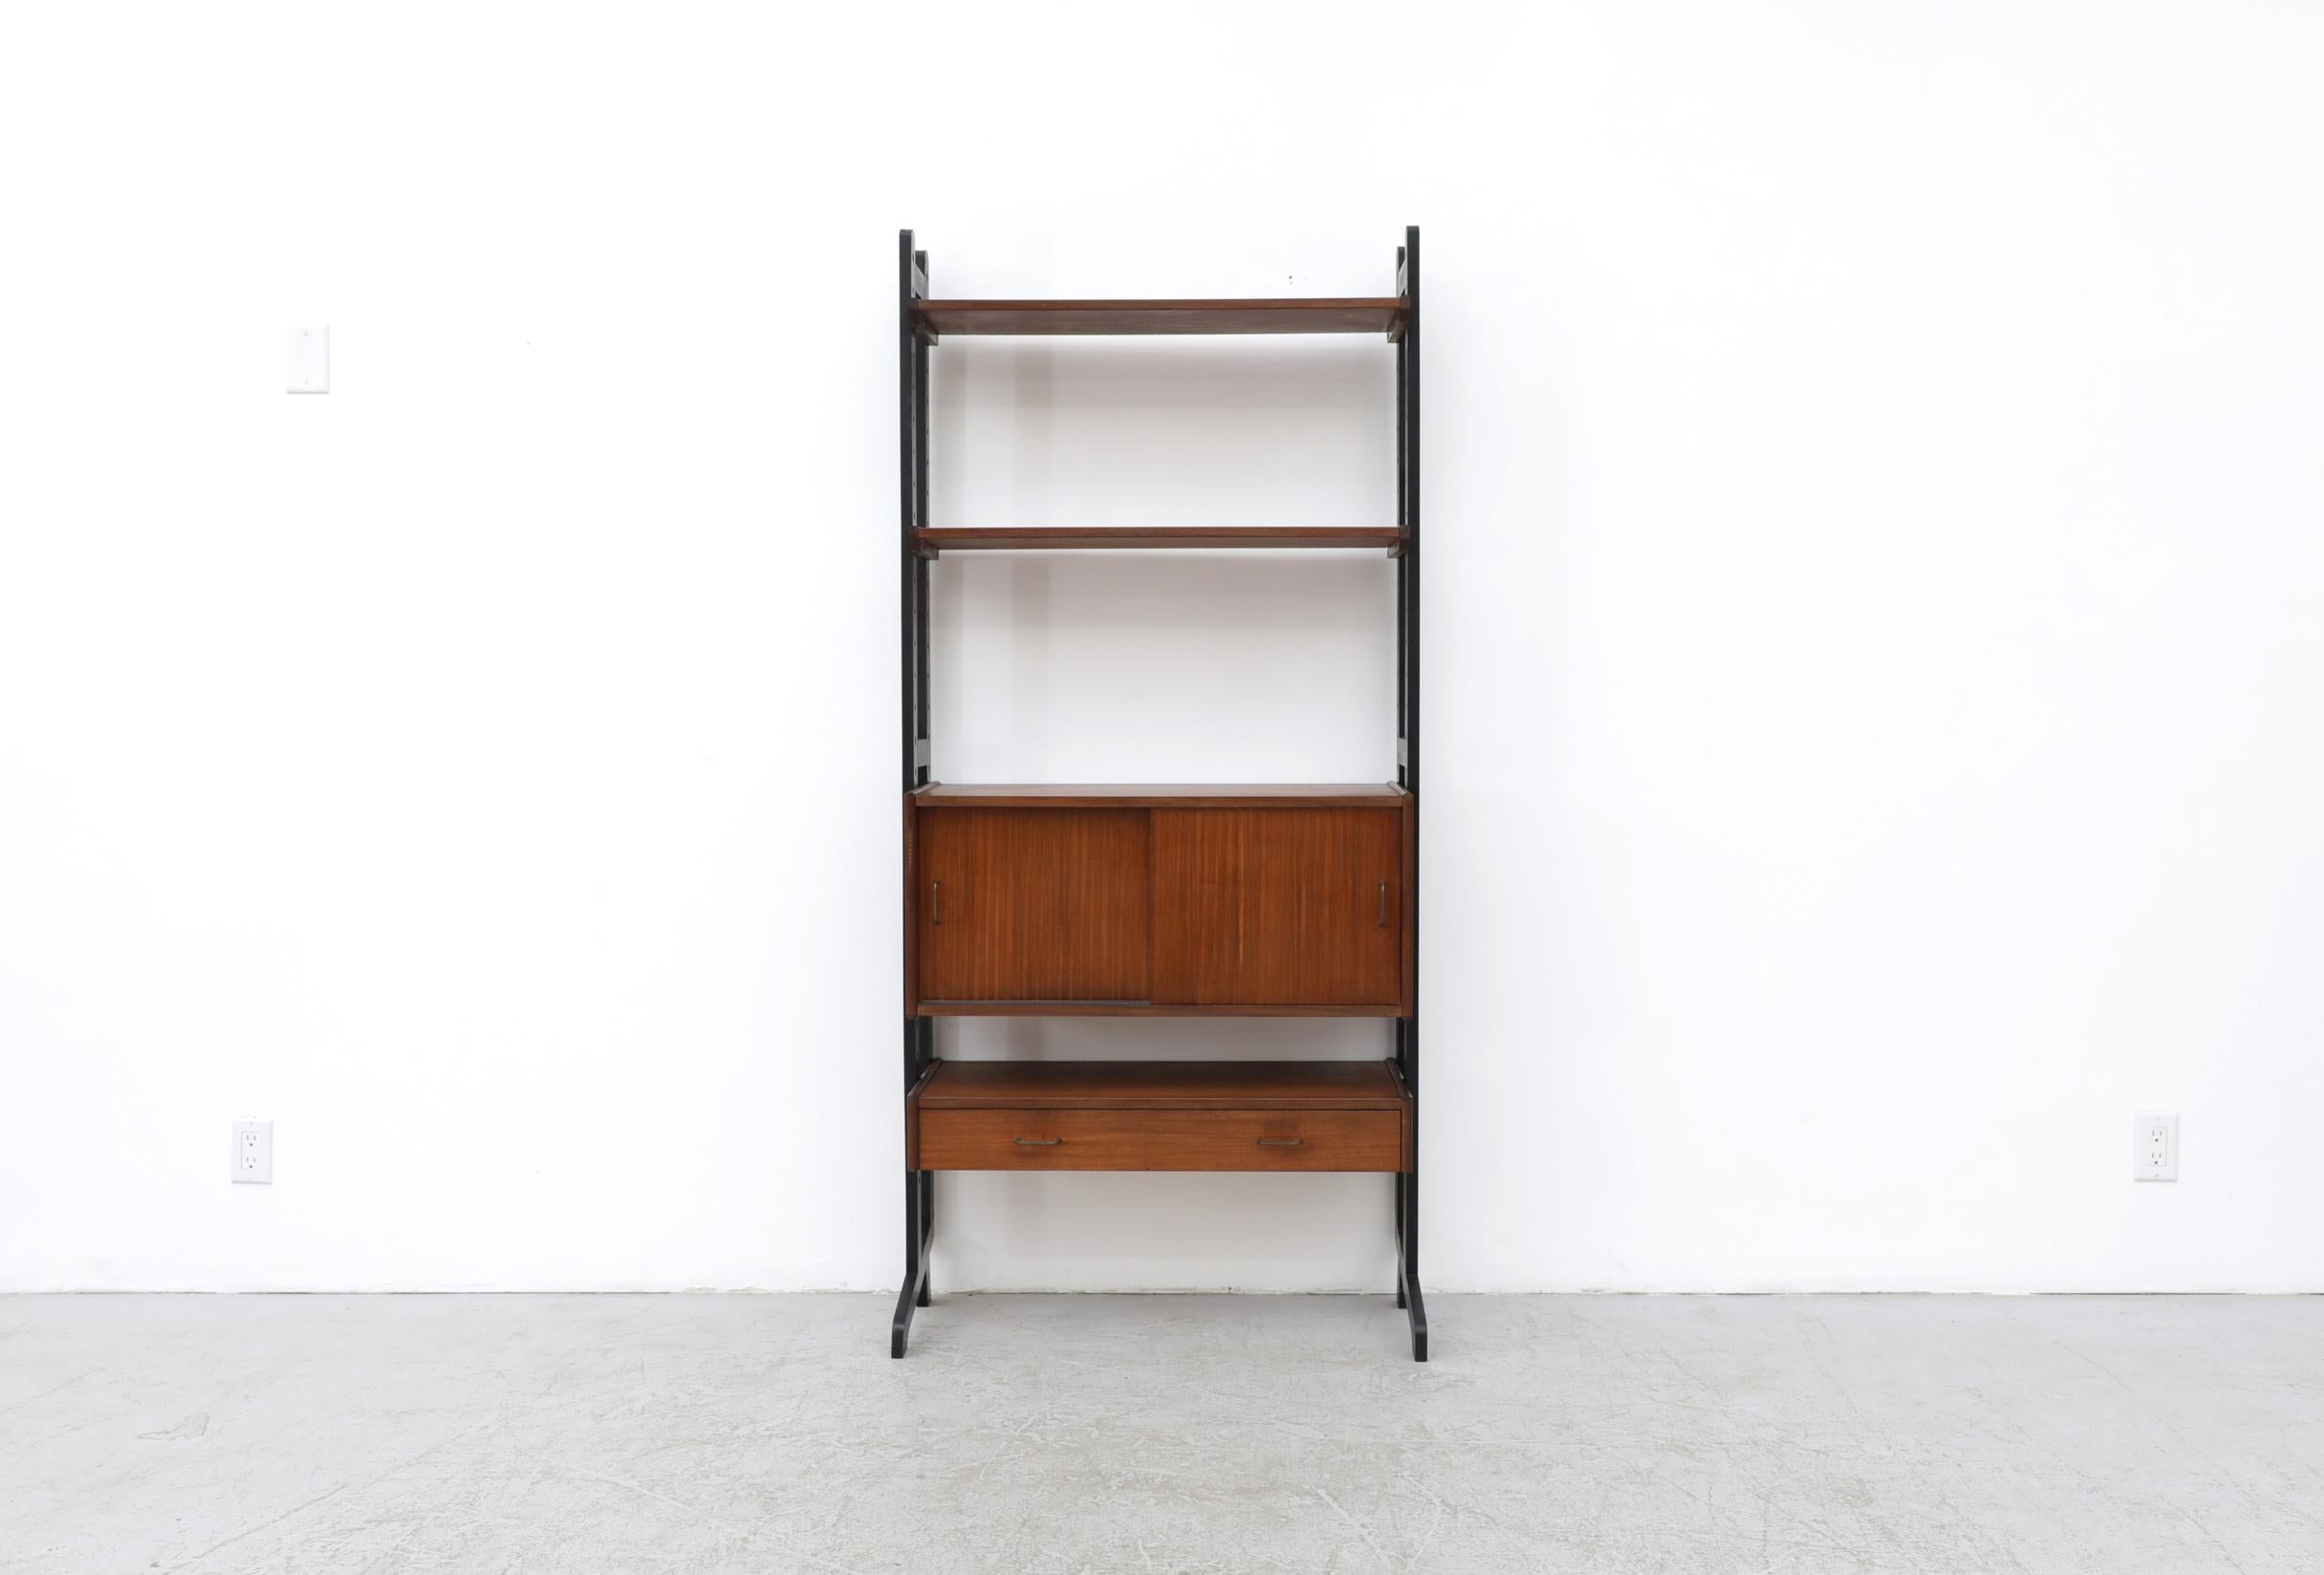 Cadovius Style Standing bookcase with a cabinet, 2 shelves and a small drawer. Simpla-Lux was a Dutch furniture company who produced self-assembly furniture items in the 60s and 70s. The height and placement of the shelving can be customized. In